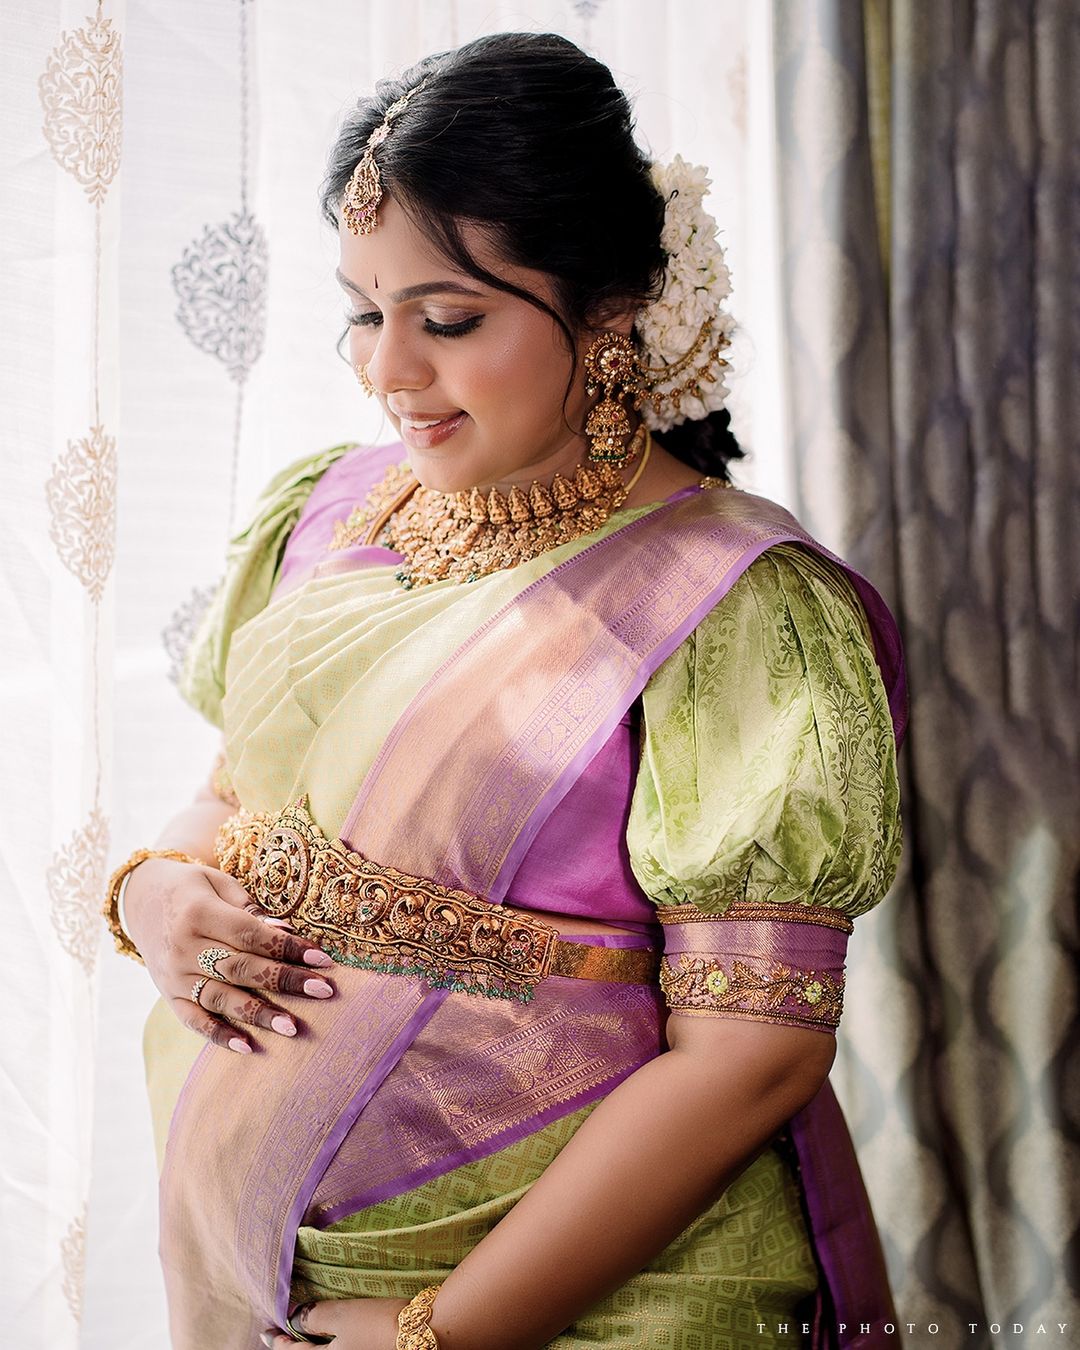 Professional baby shower photoshoot capturing precious moments in Coimbatore.